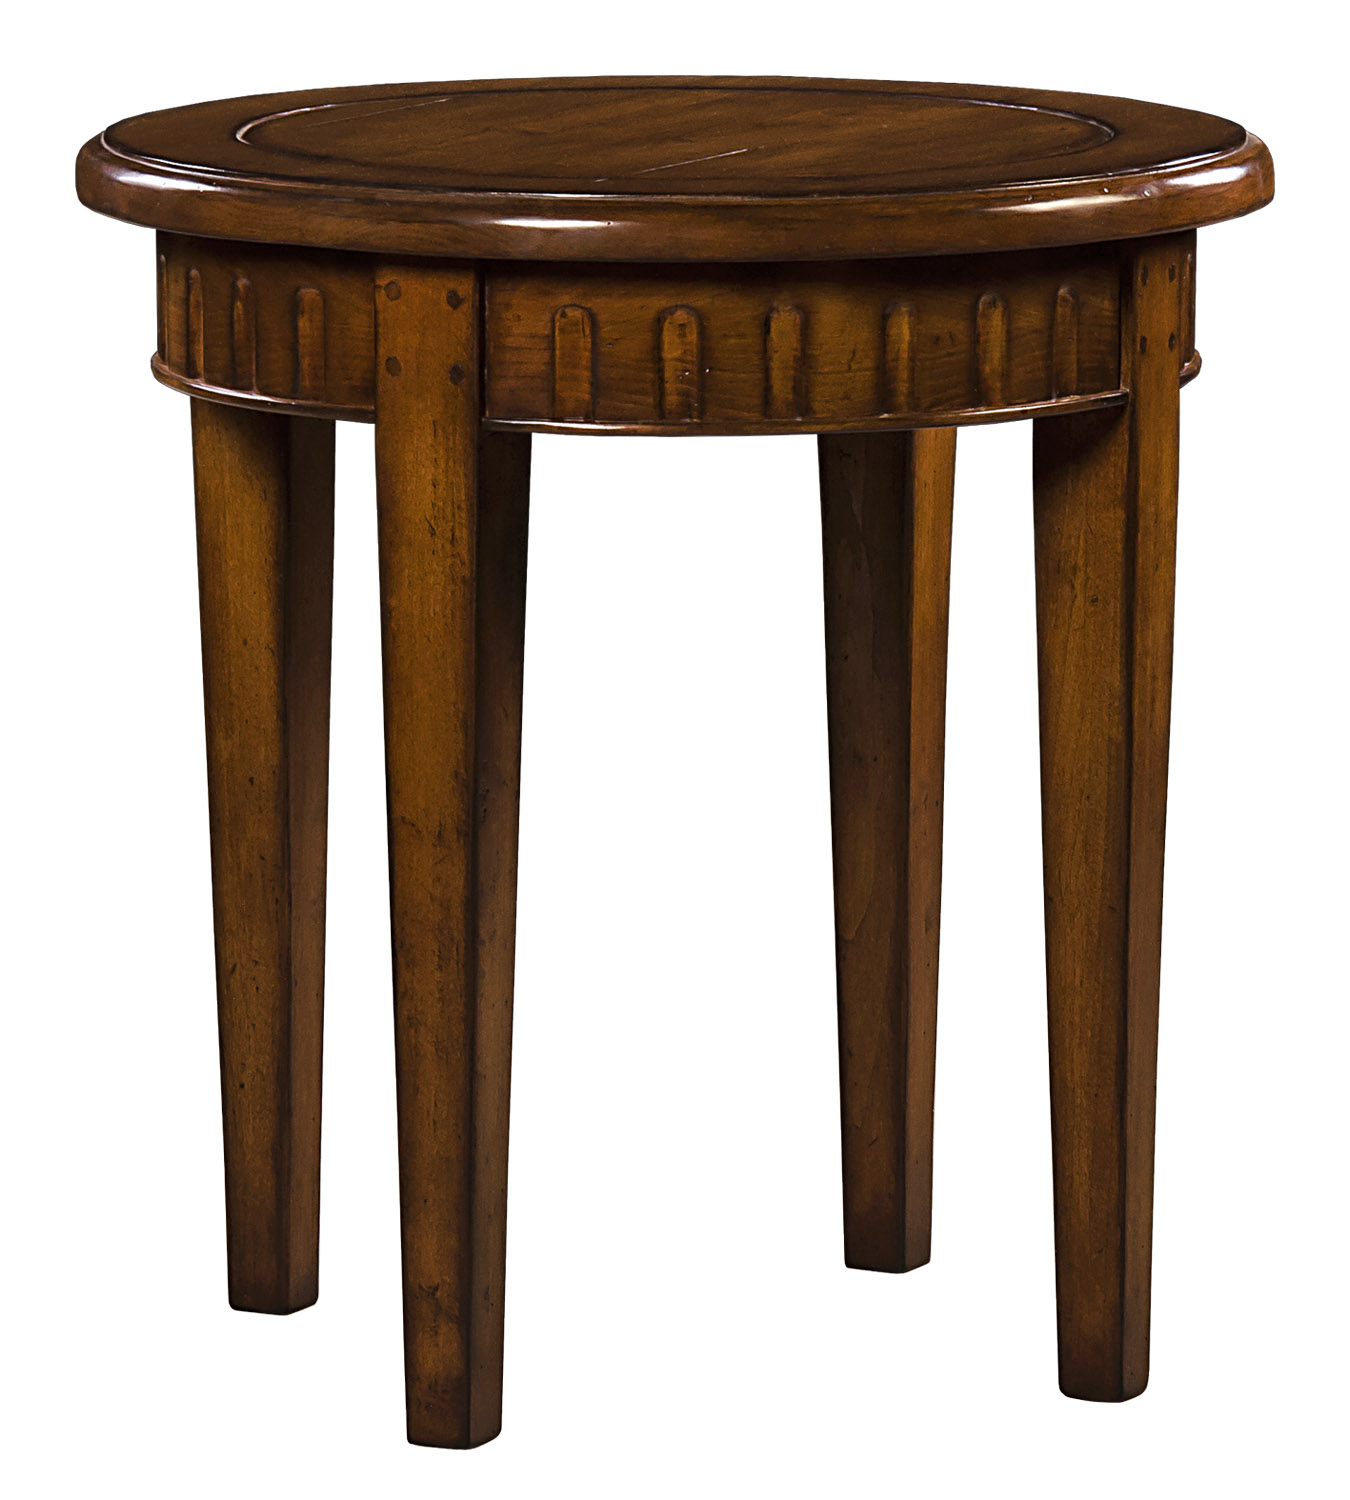 Marcus traditional transitional round side or end table by Woodland furniture in Idaho Falls